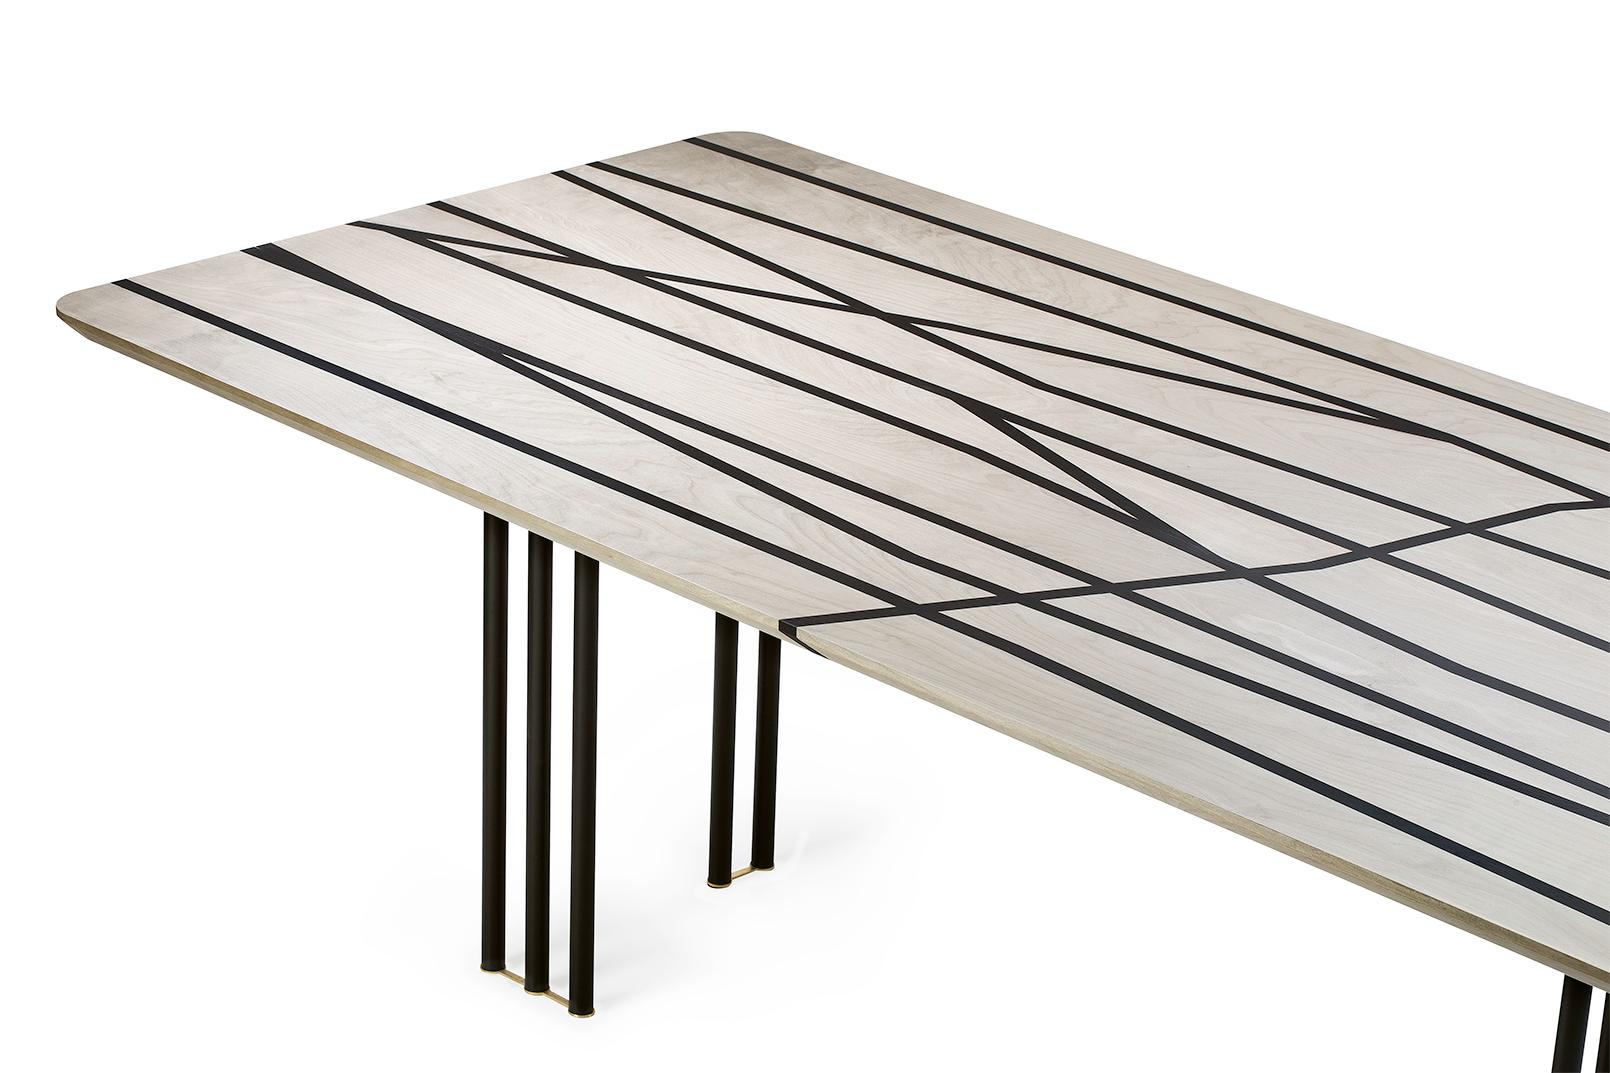 Joinery 21st Century Foresta Inlaid Table in Birch, Black Ash, Metal Legs, Made in Italy For Sale